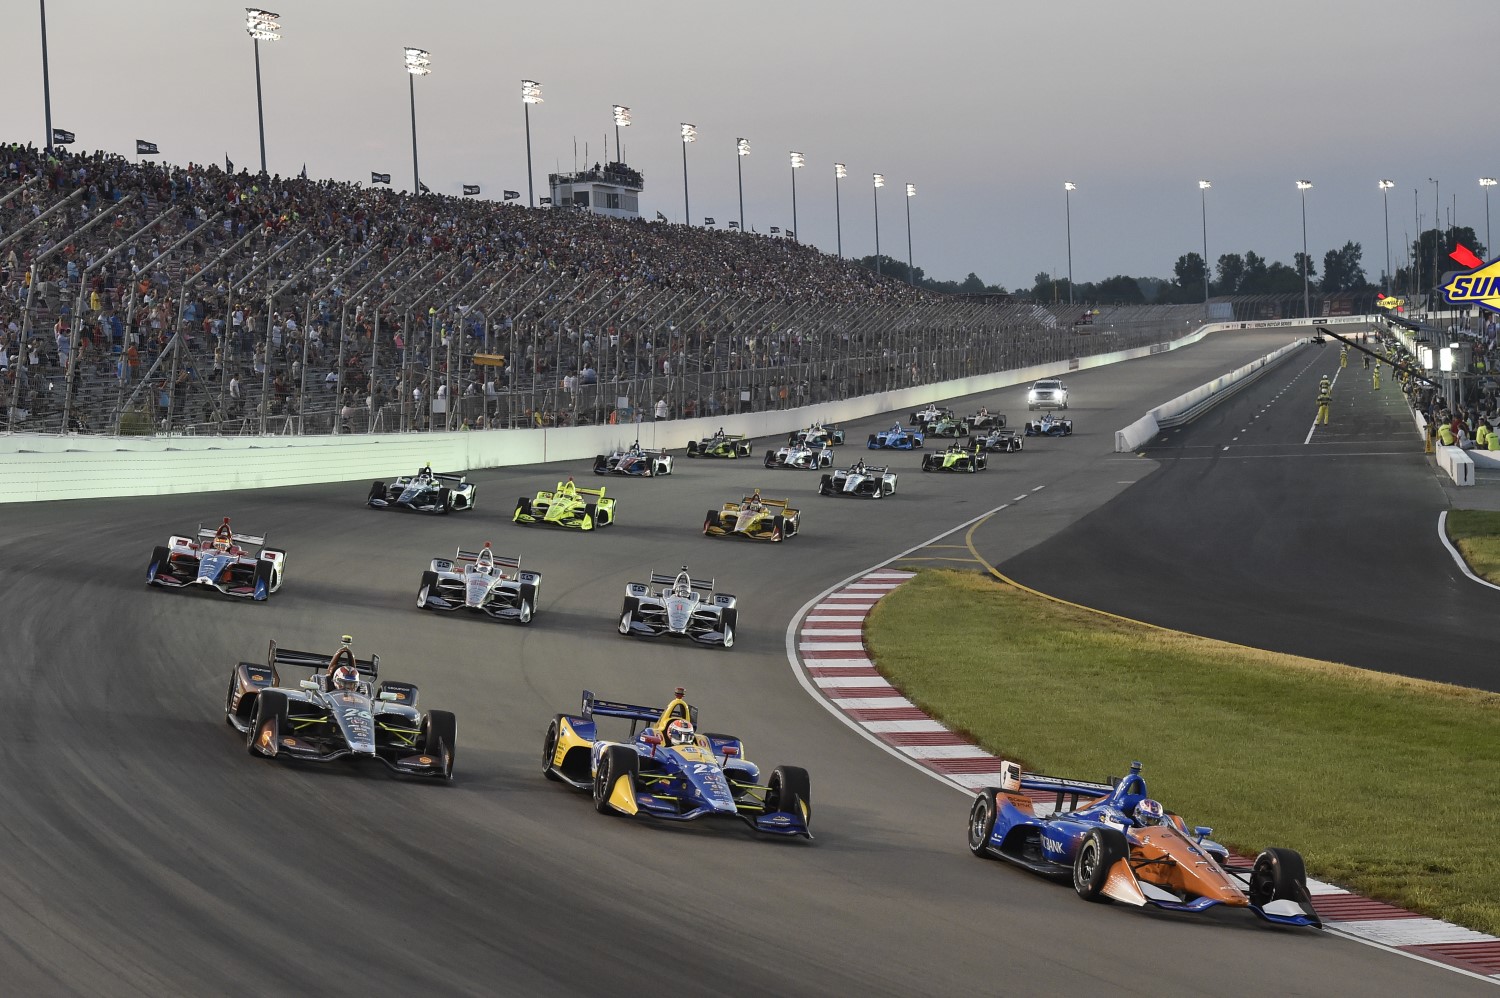 By moving to Friday night Aug 21, 2020 one can assume the truck race will be a support race to the Saturday night IndyCar race at Gateway in August, but that has not been confirmed